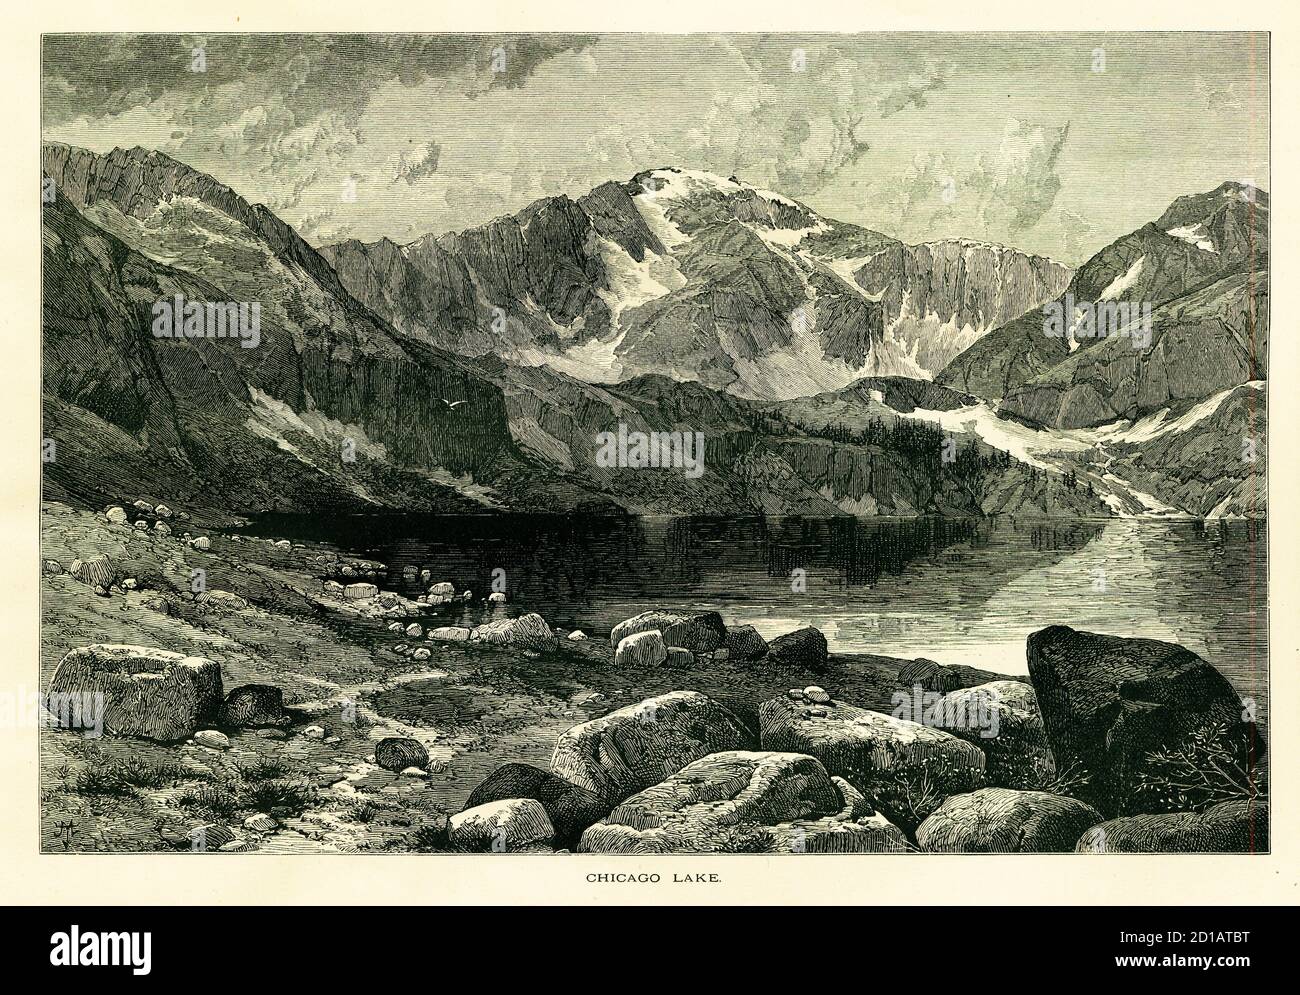 Antique illustration of Chicago Lake at the foot of Mount Evans, a mountain in the Front Range of the Rocky Mountains, Colorado, USA. Engraving publis Stock Photo